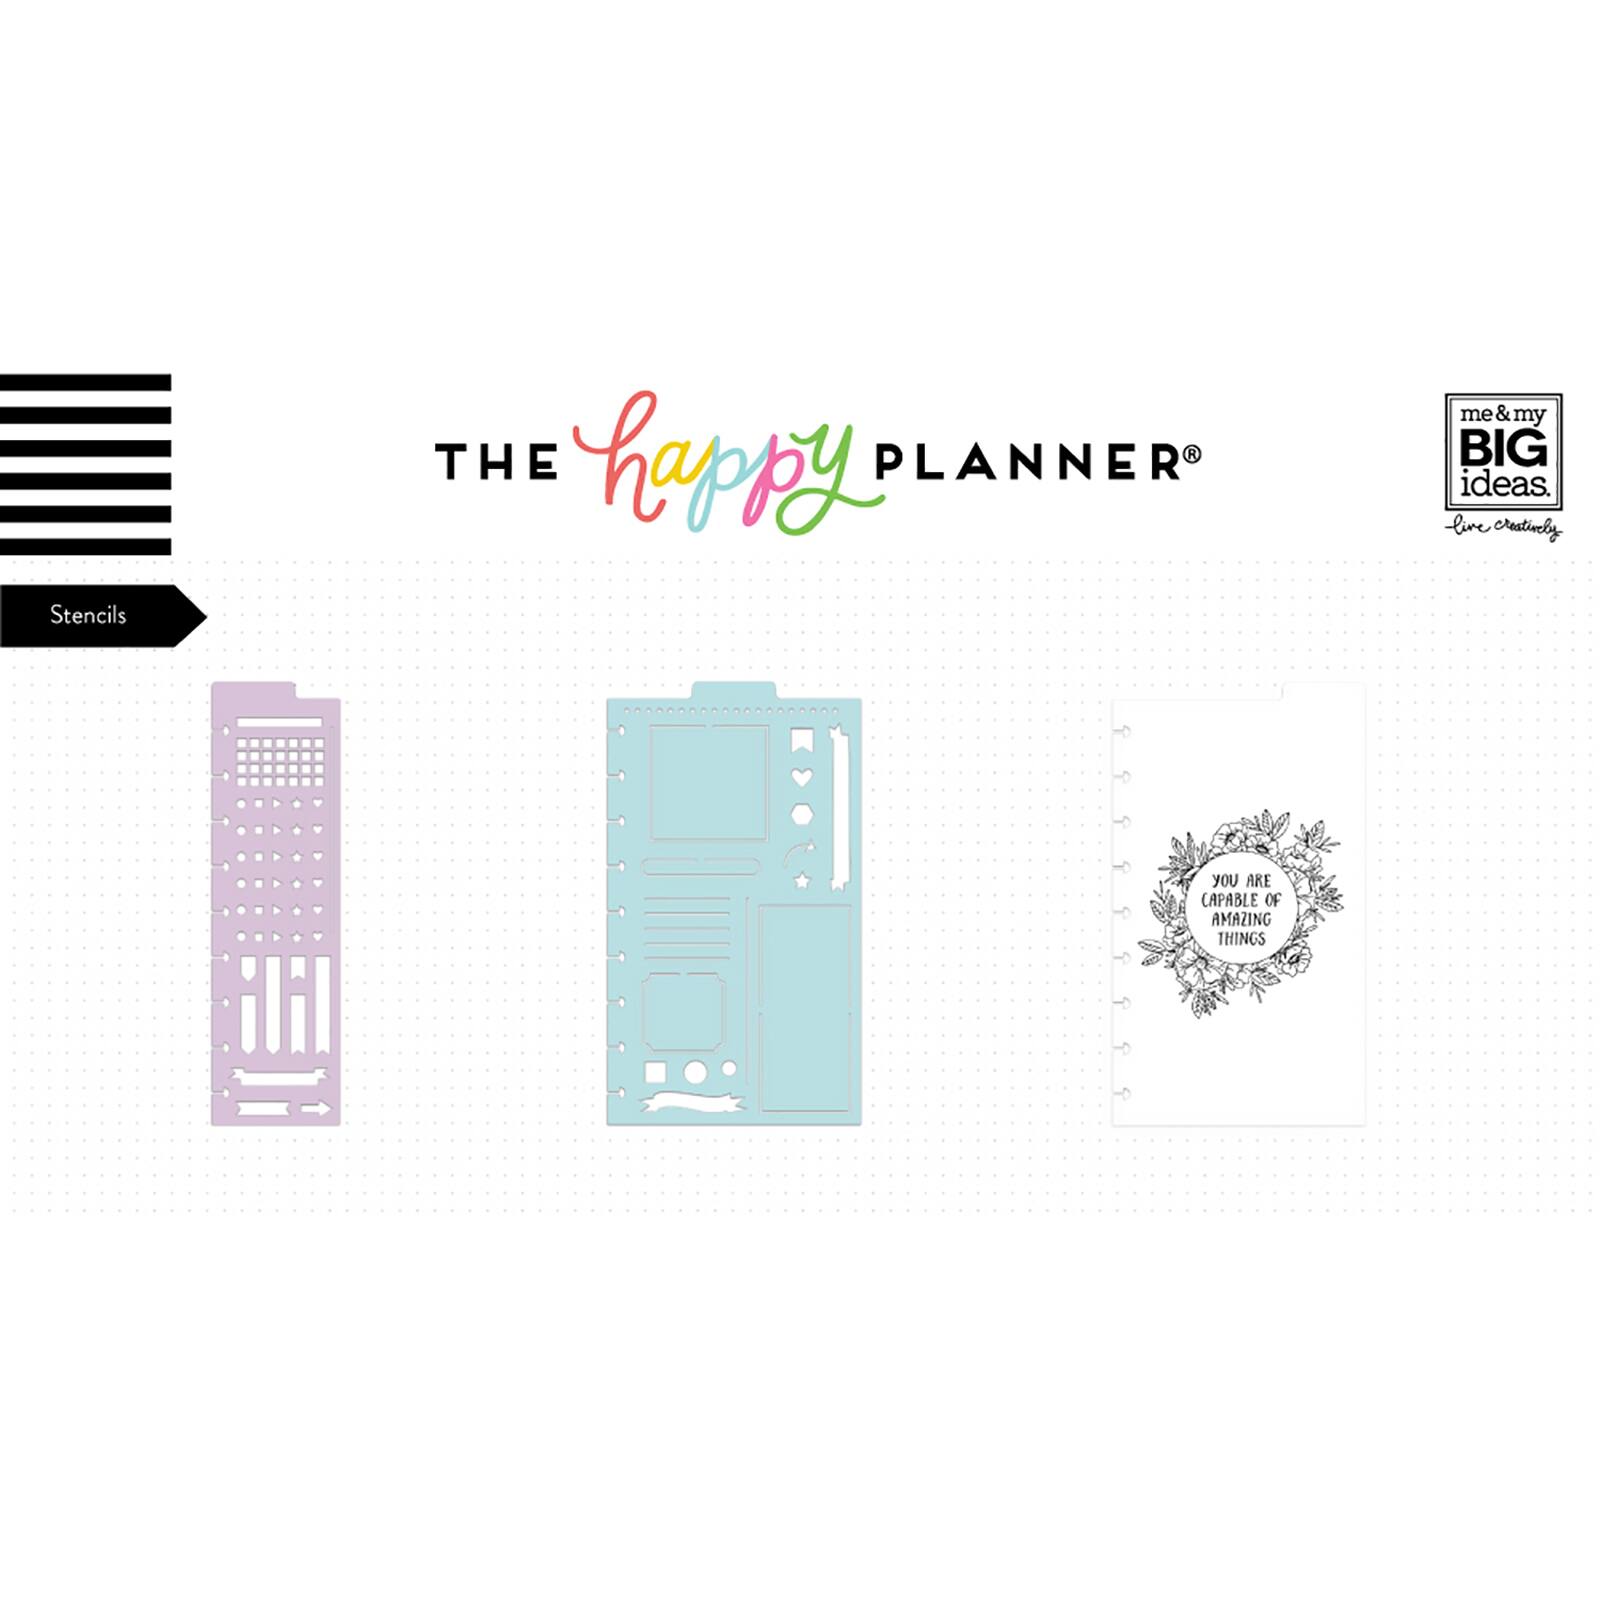 Happy planner guided journal